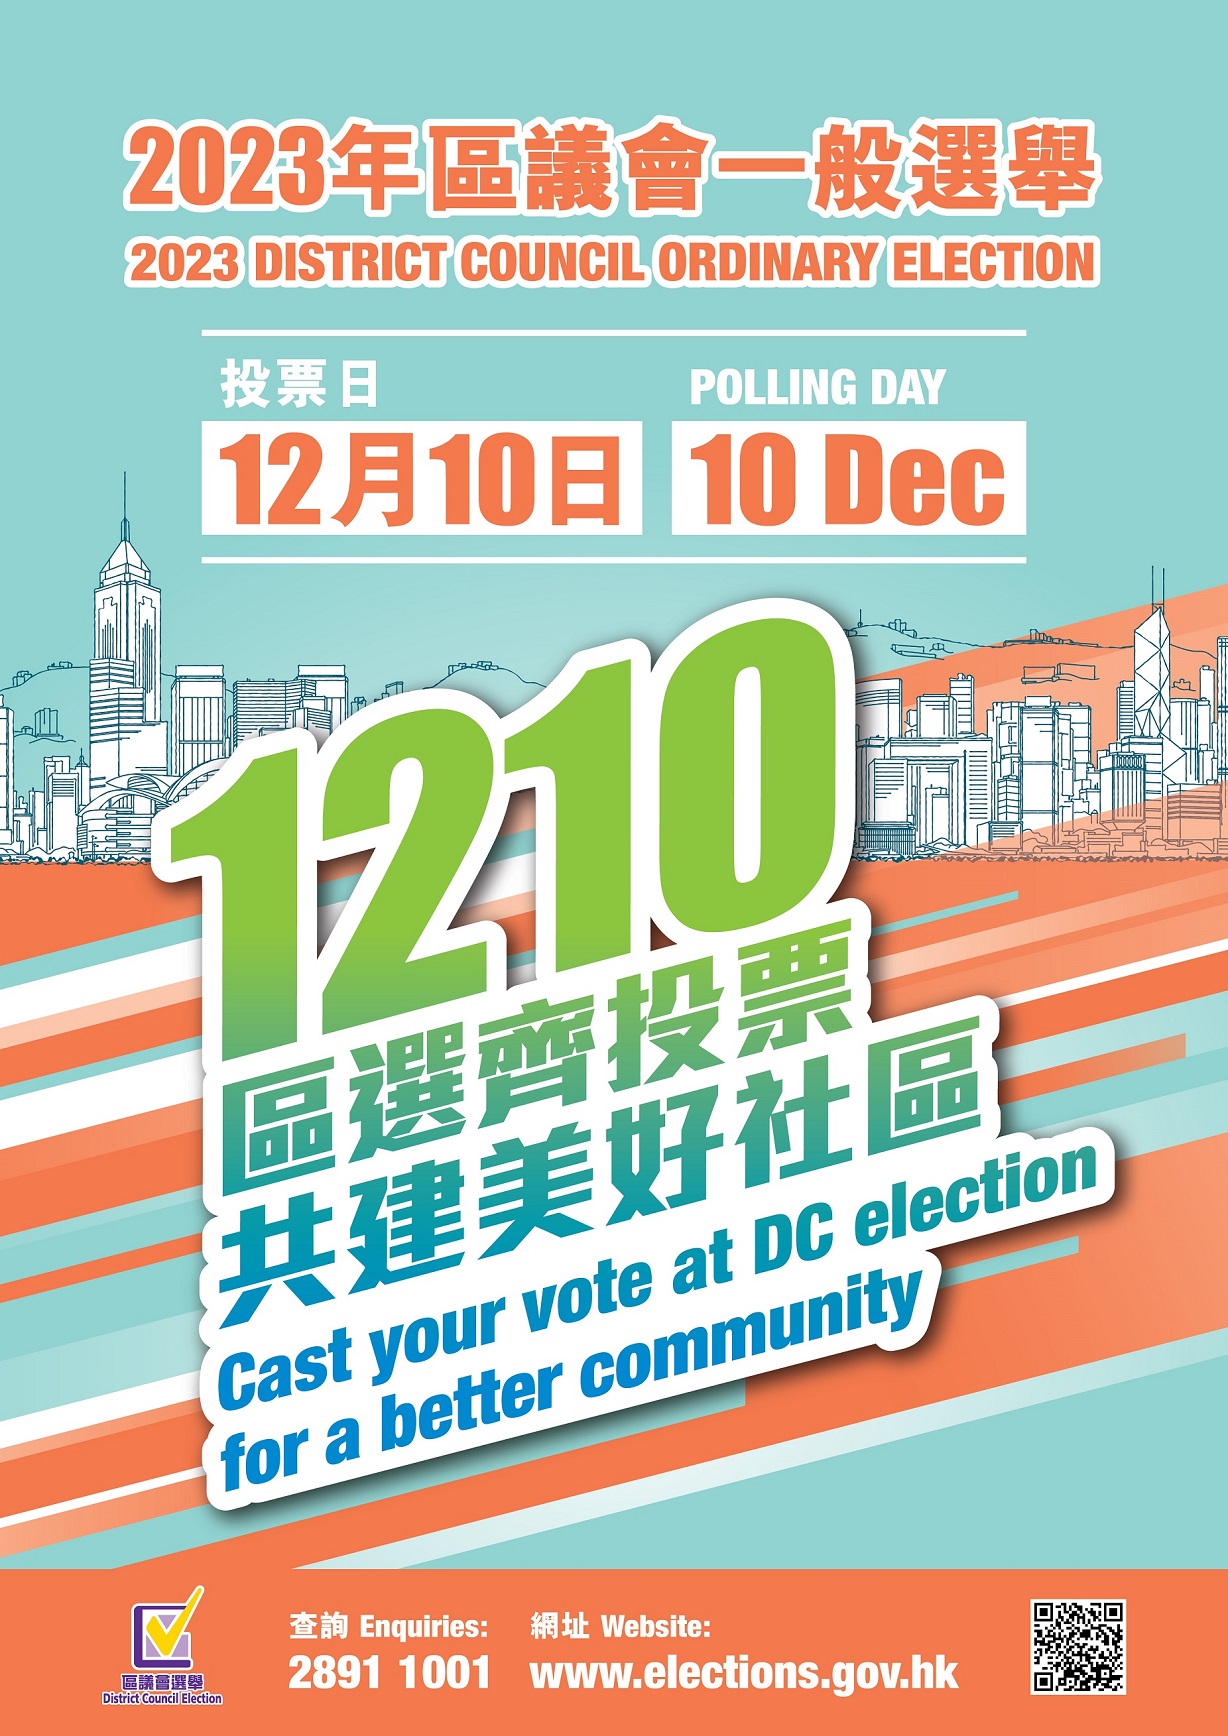 Cast your vote at DC election on 10 December for a better community (Polling day)